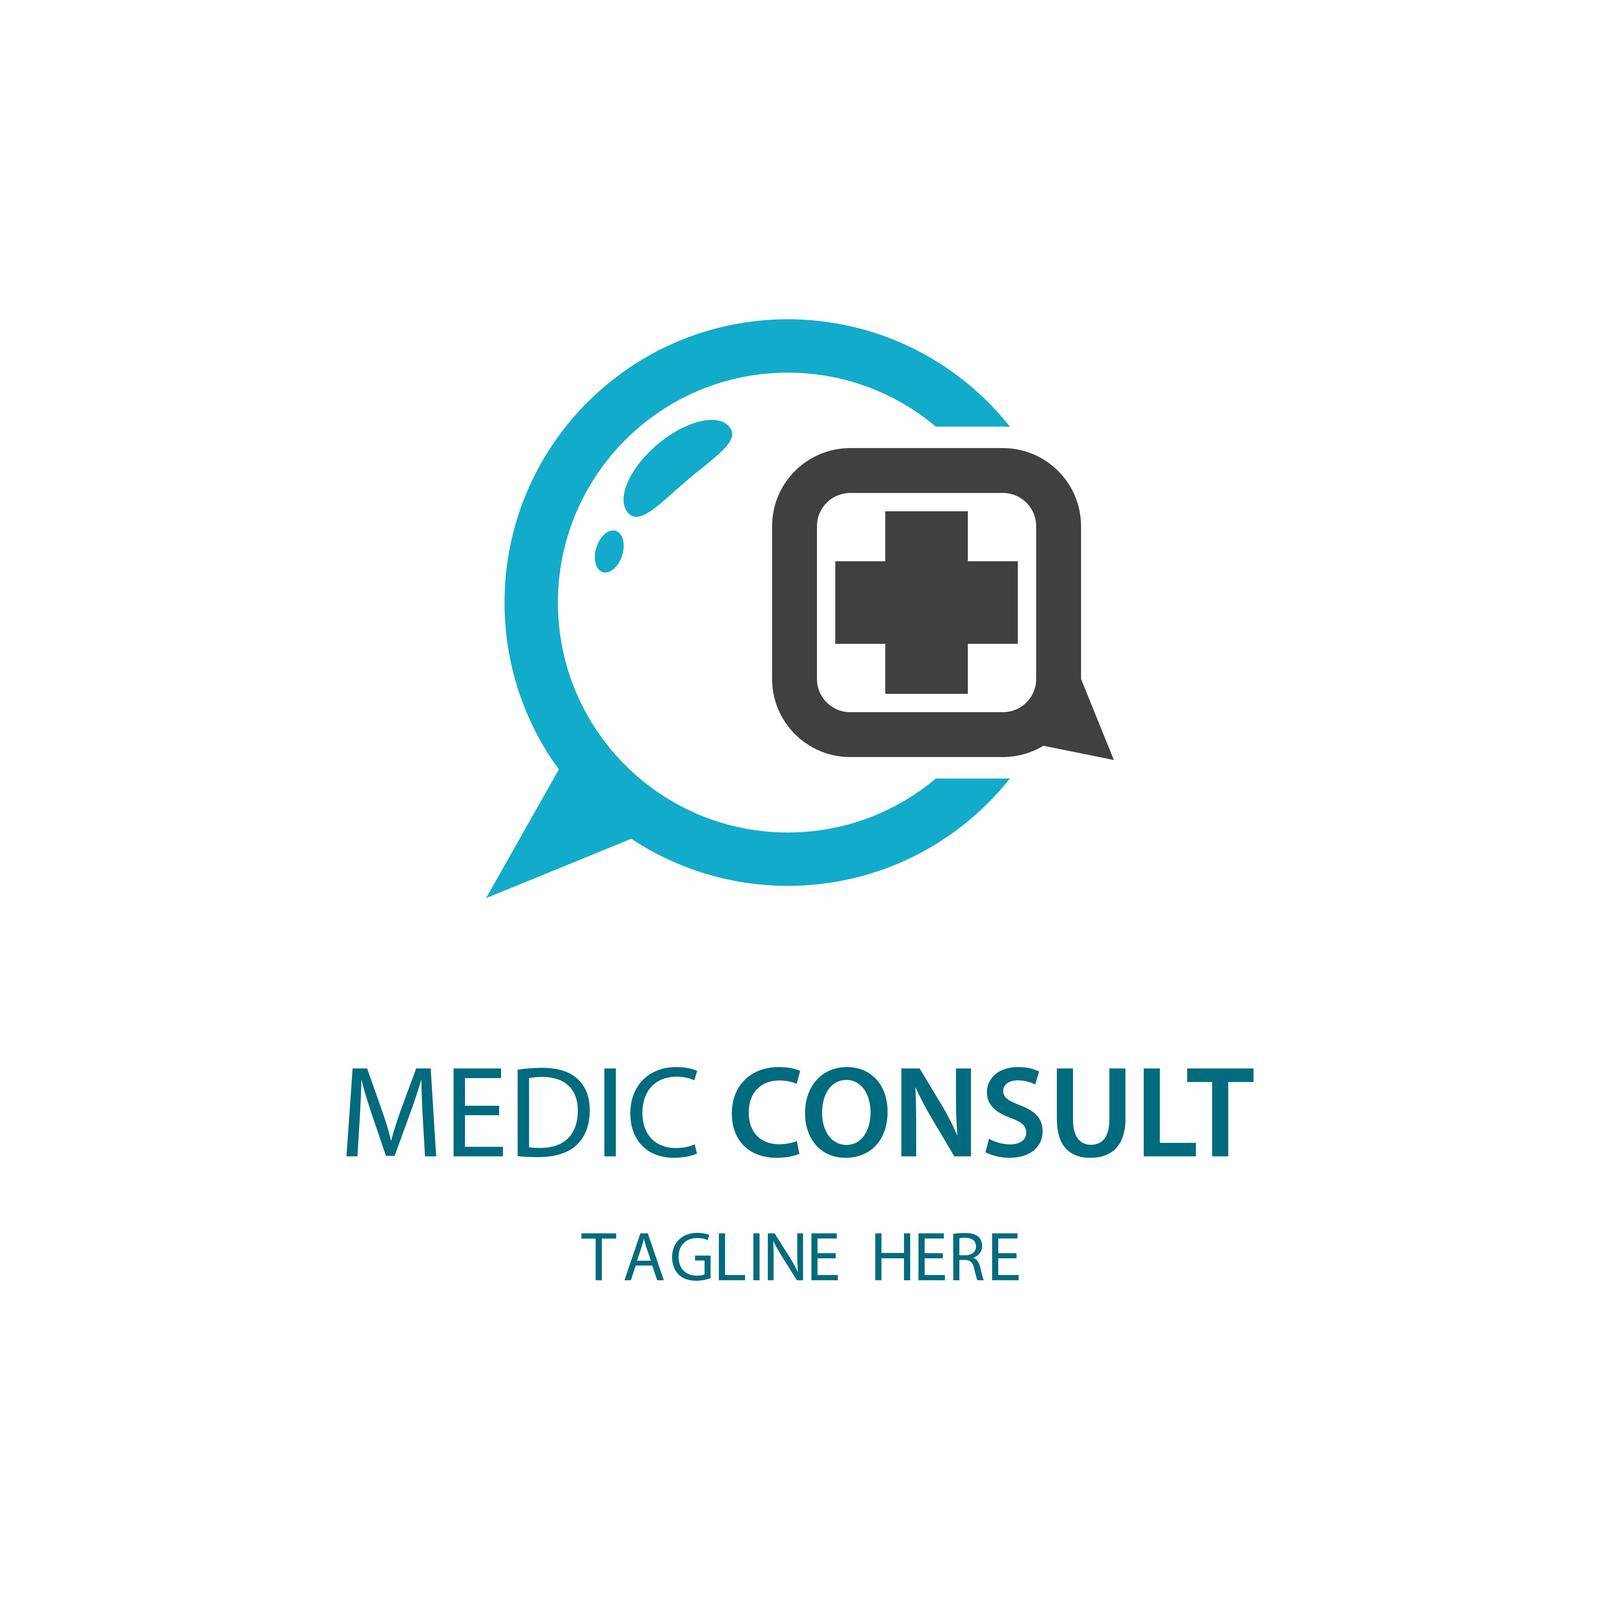 Medic consult logo images by Fat17